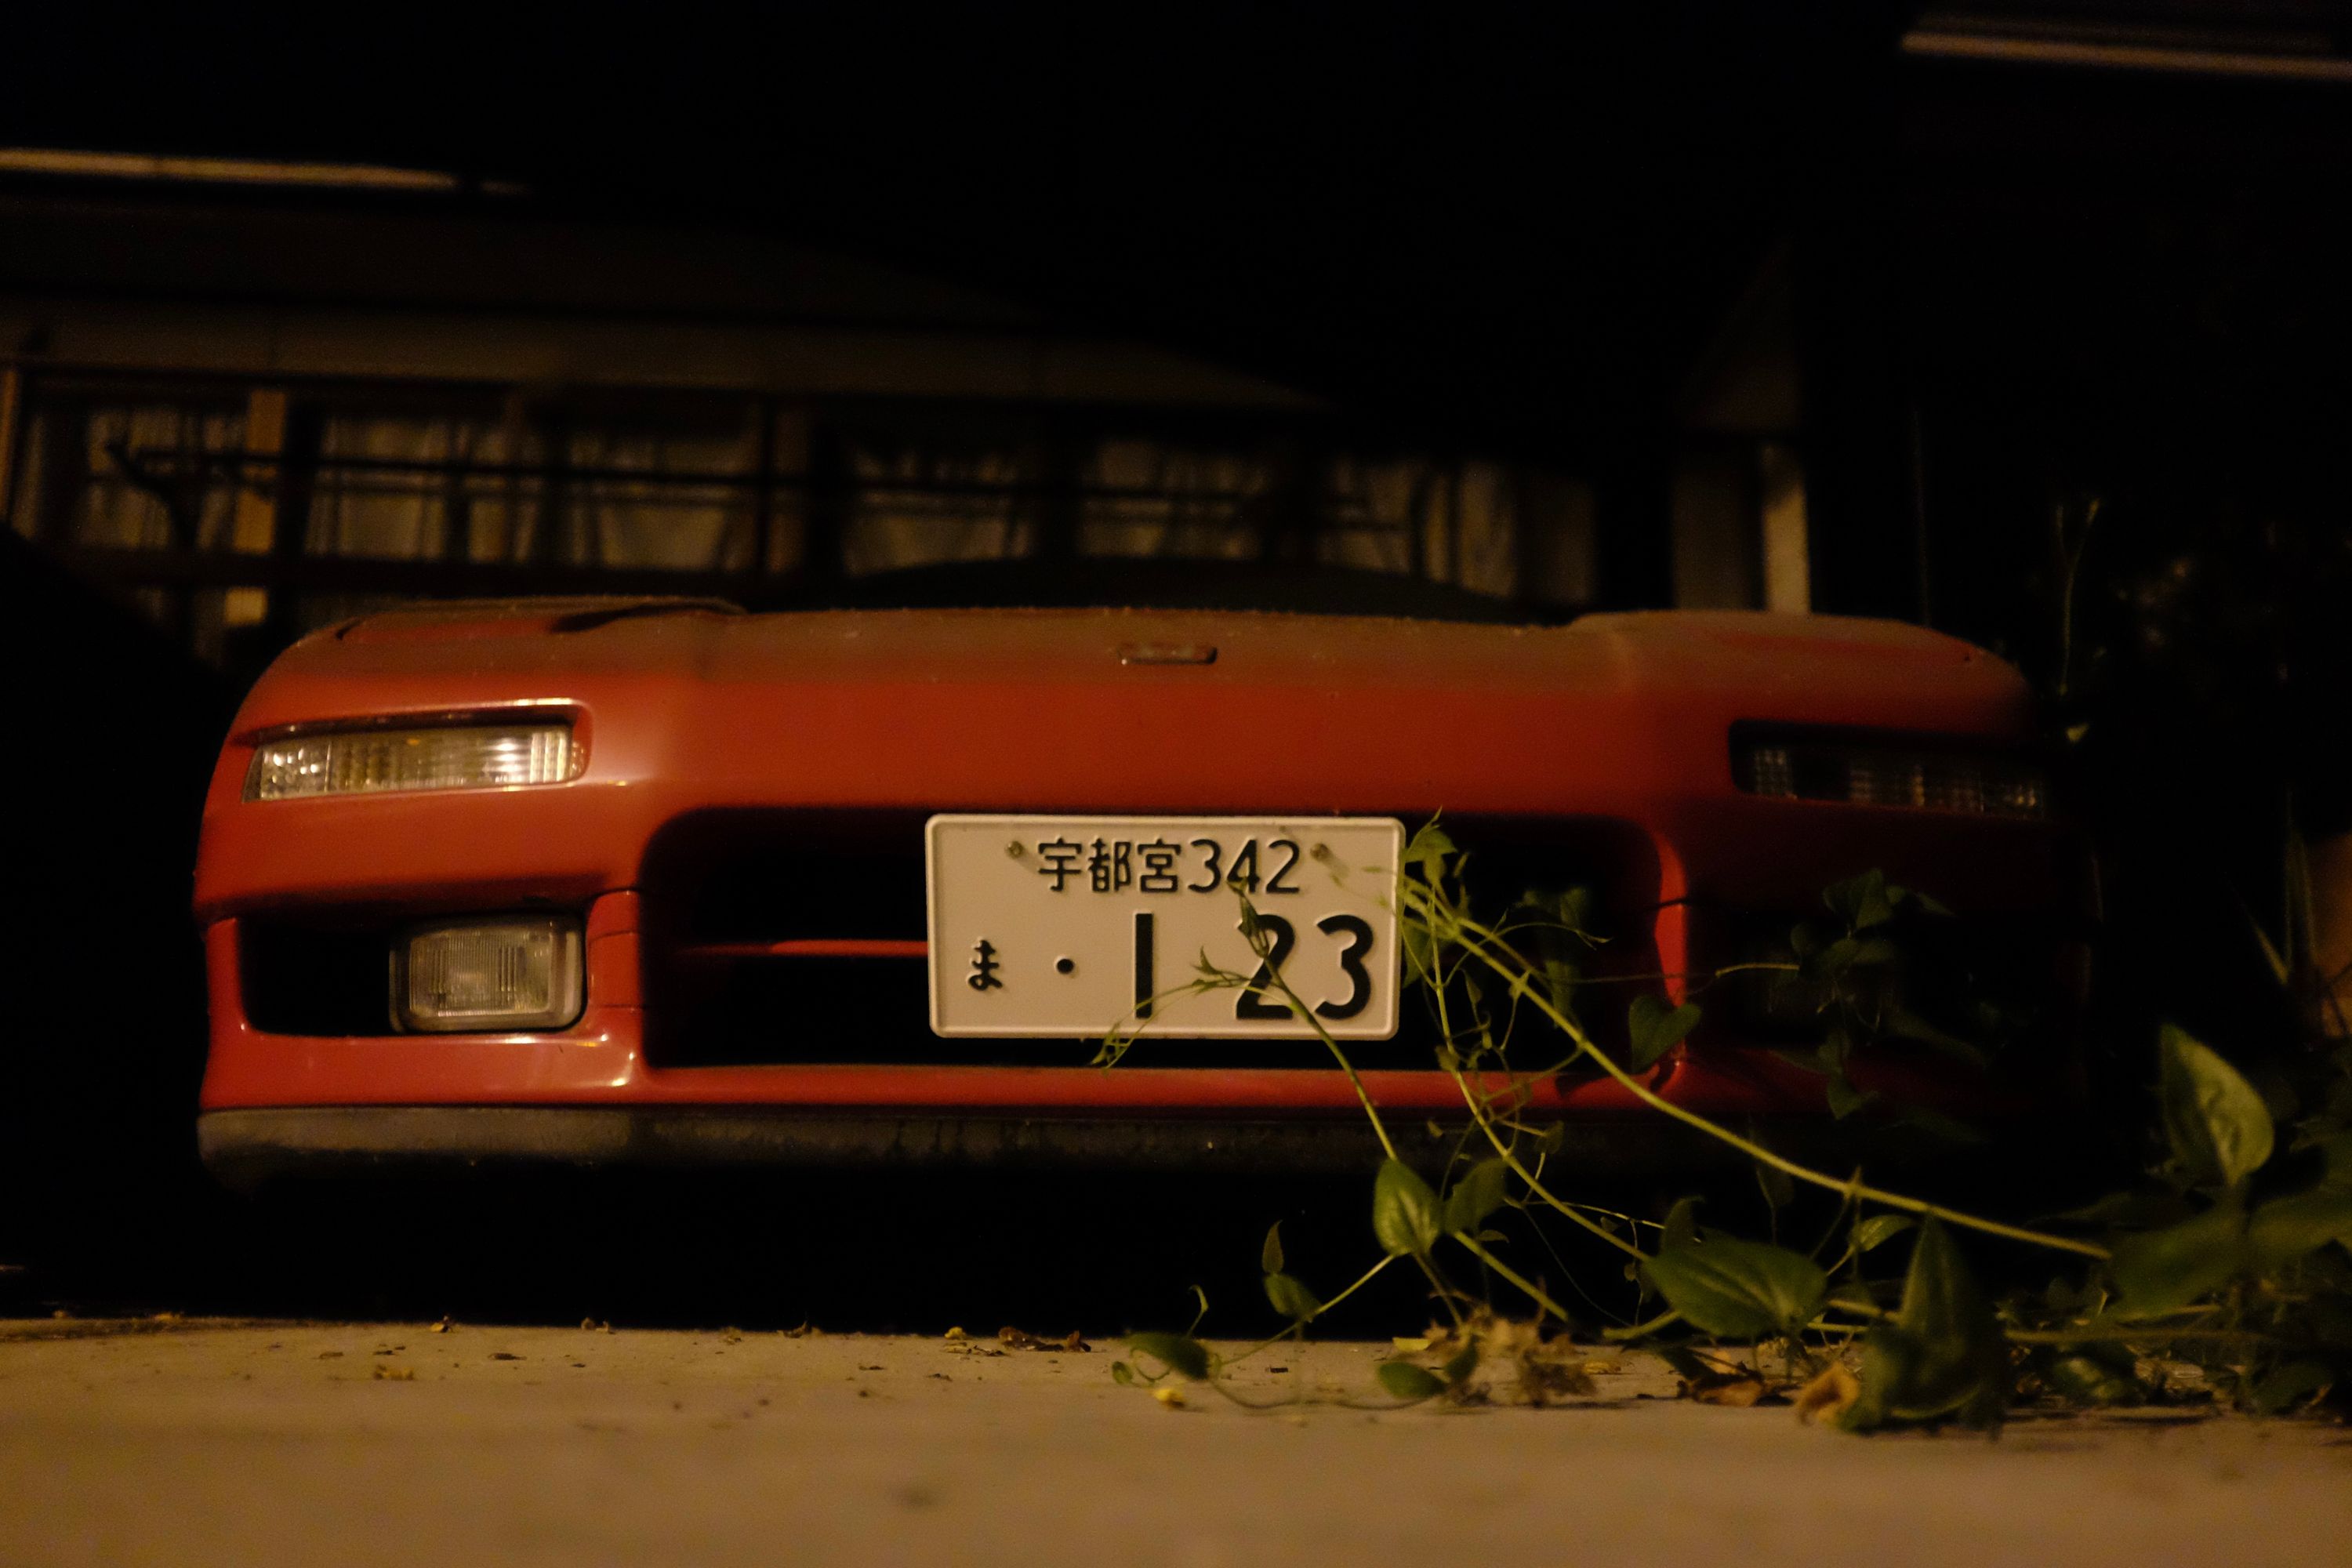 A NSX, very dusty and partly overgrown with weeds, stands in a garage at night.